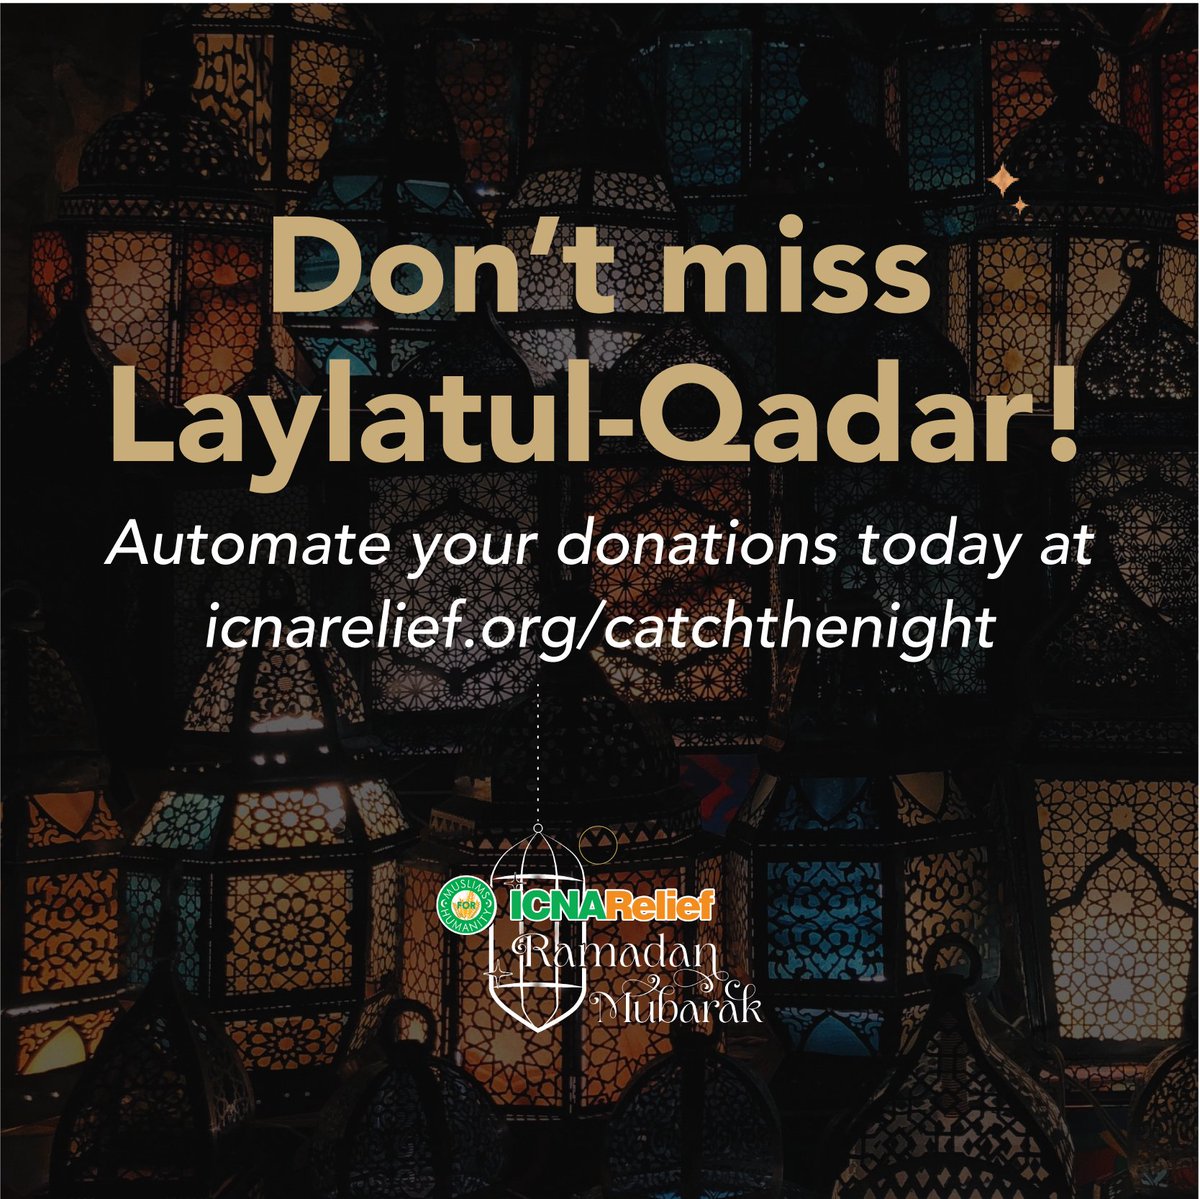 As we are approaching the last 10 nights of Ramadan, automate your donations today to catch the night of Laylatul-Qadr. Catch the night at icnarelief.org/catchthenight